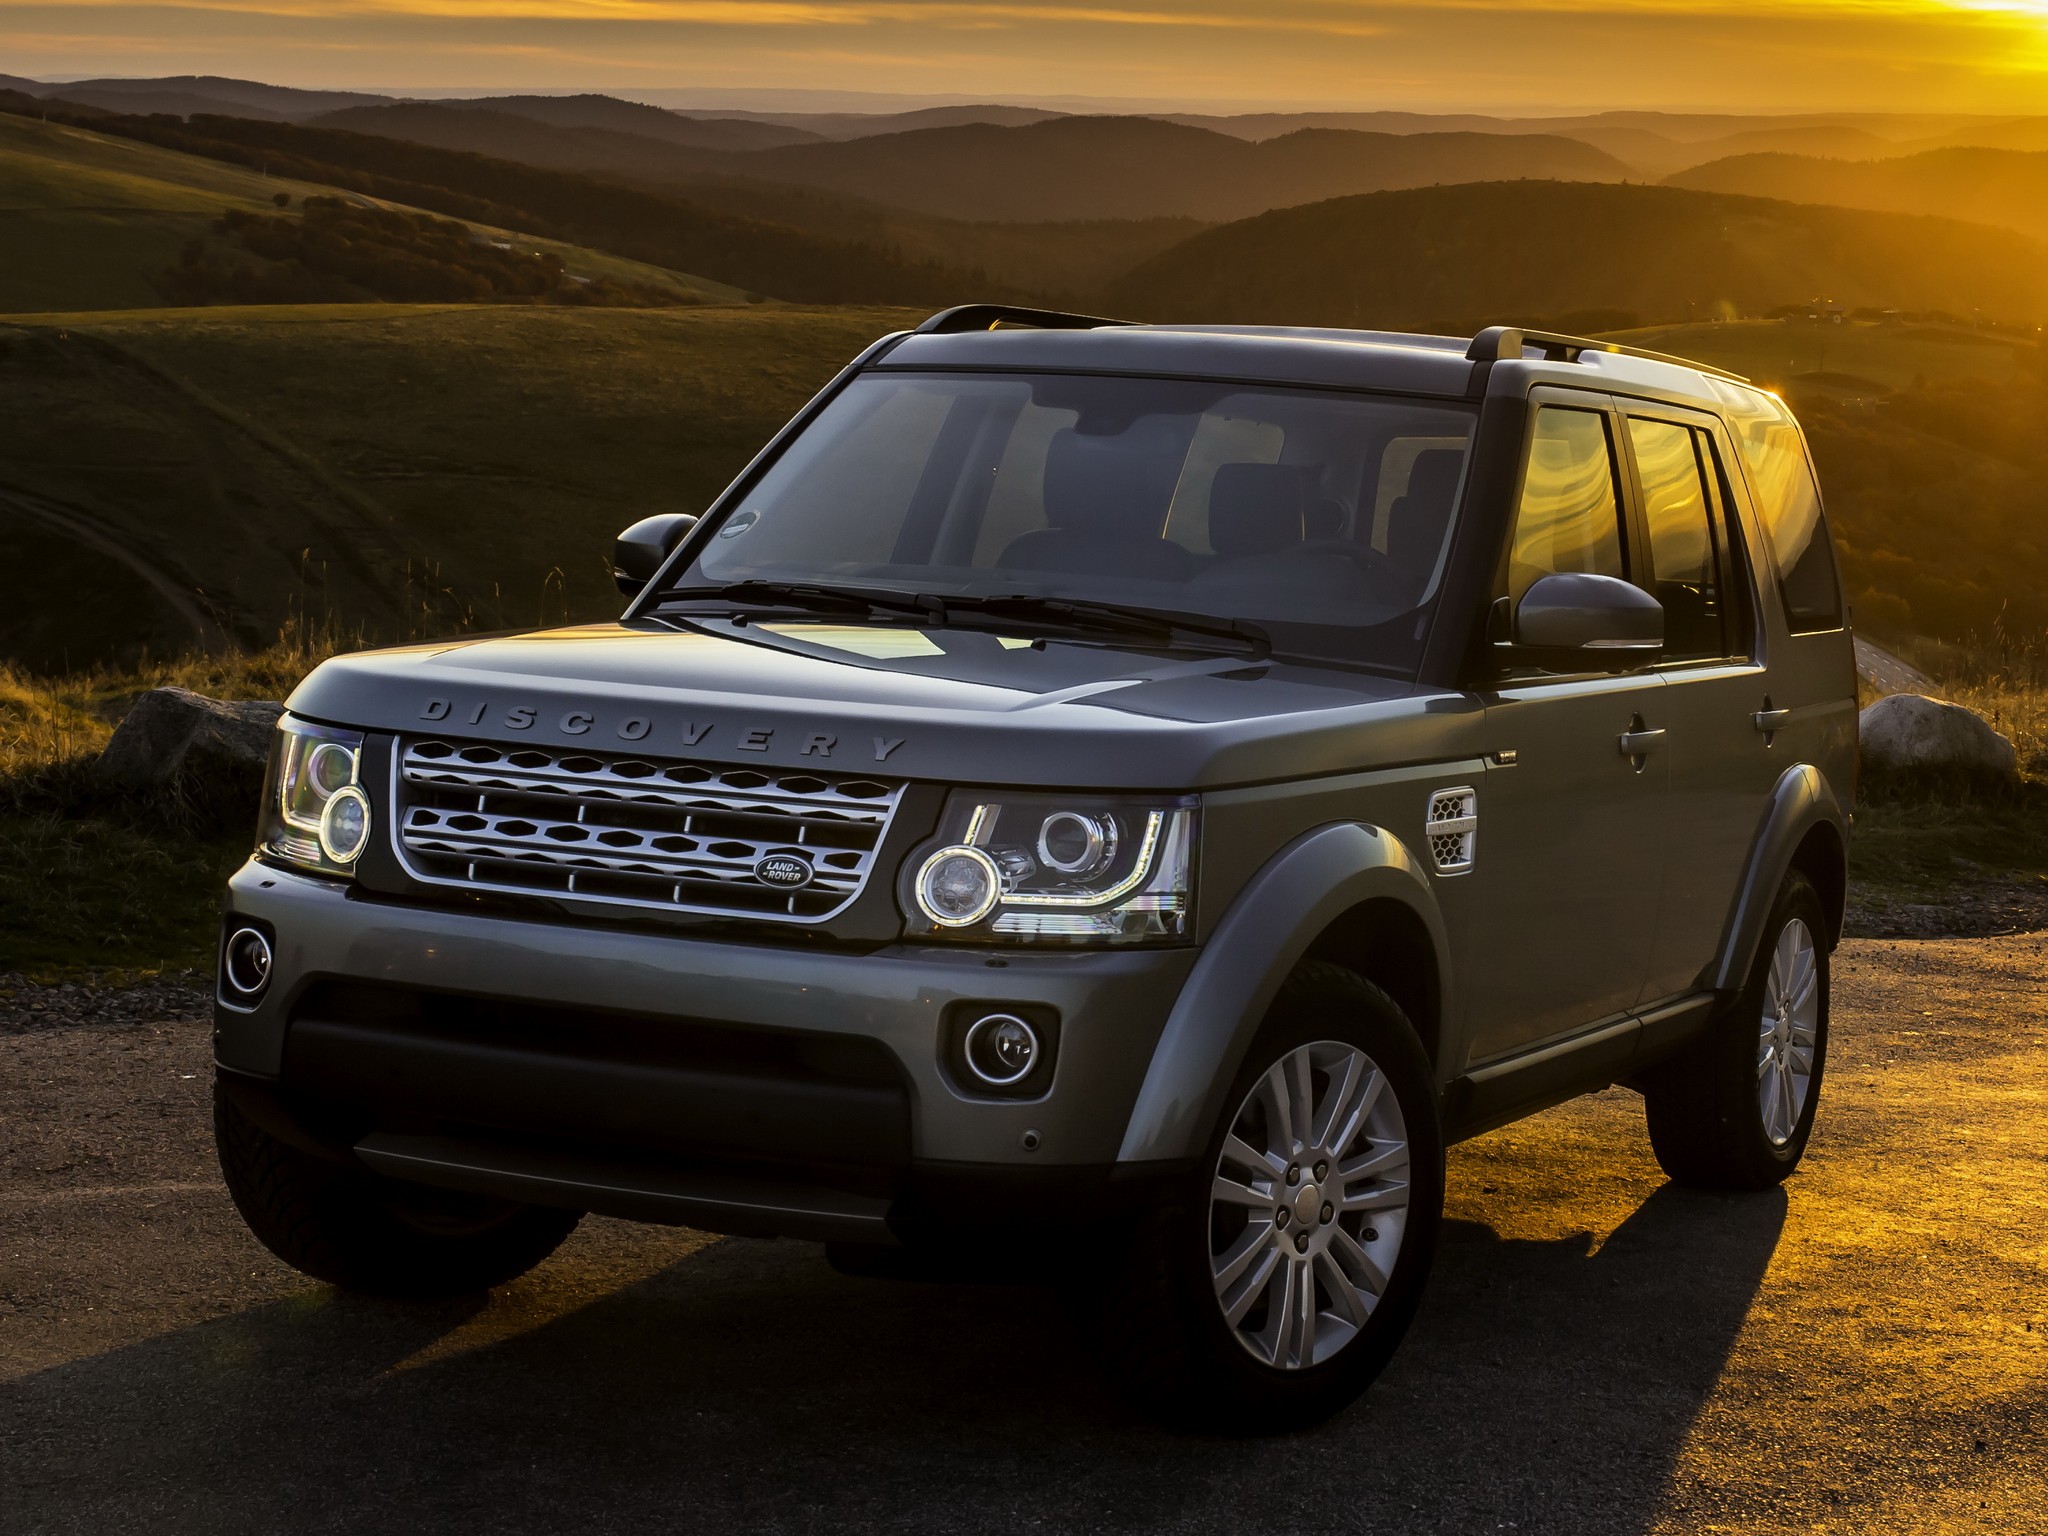 LAND ROVER Discovery LR4 2013, 2014, 2015, 2016